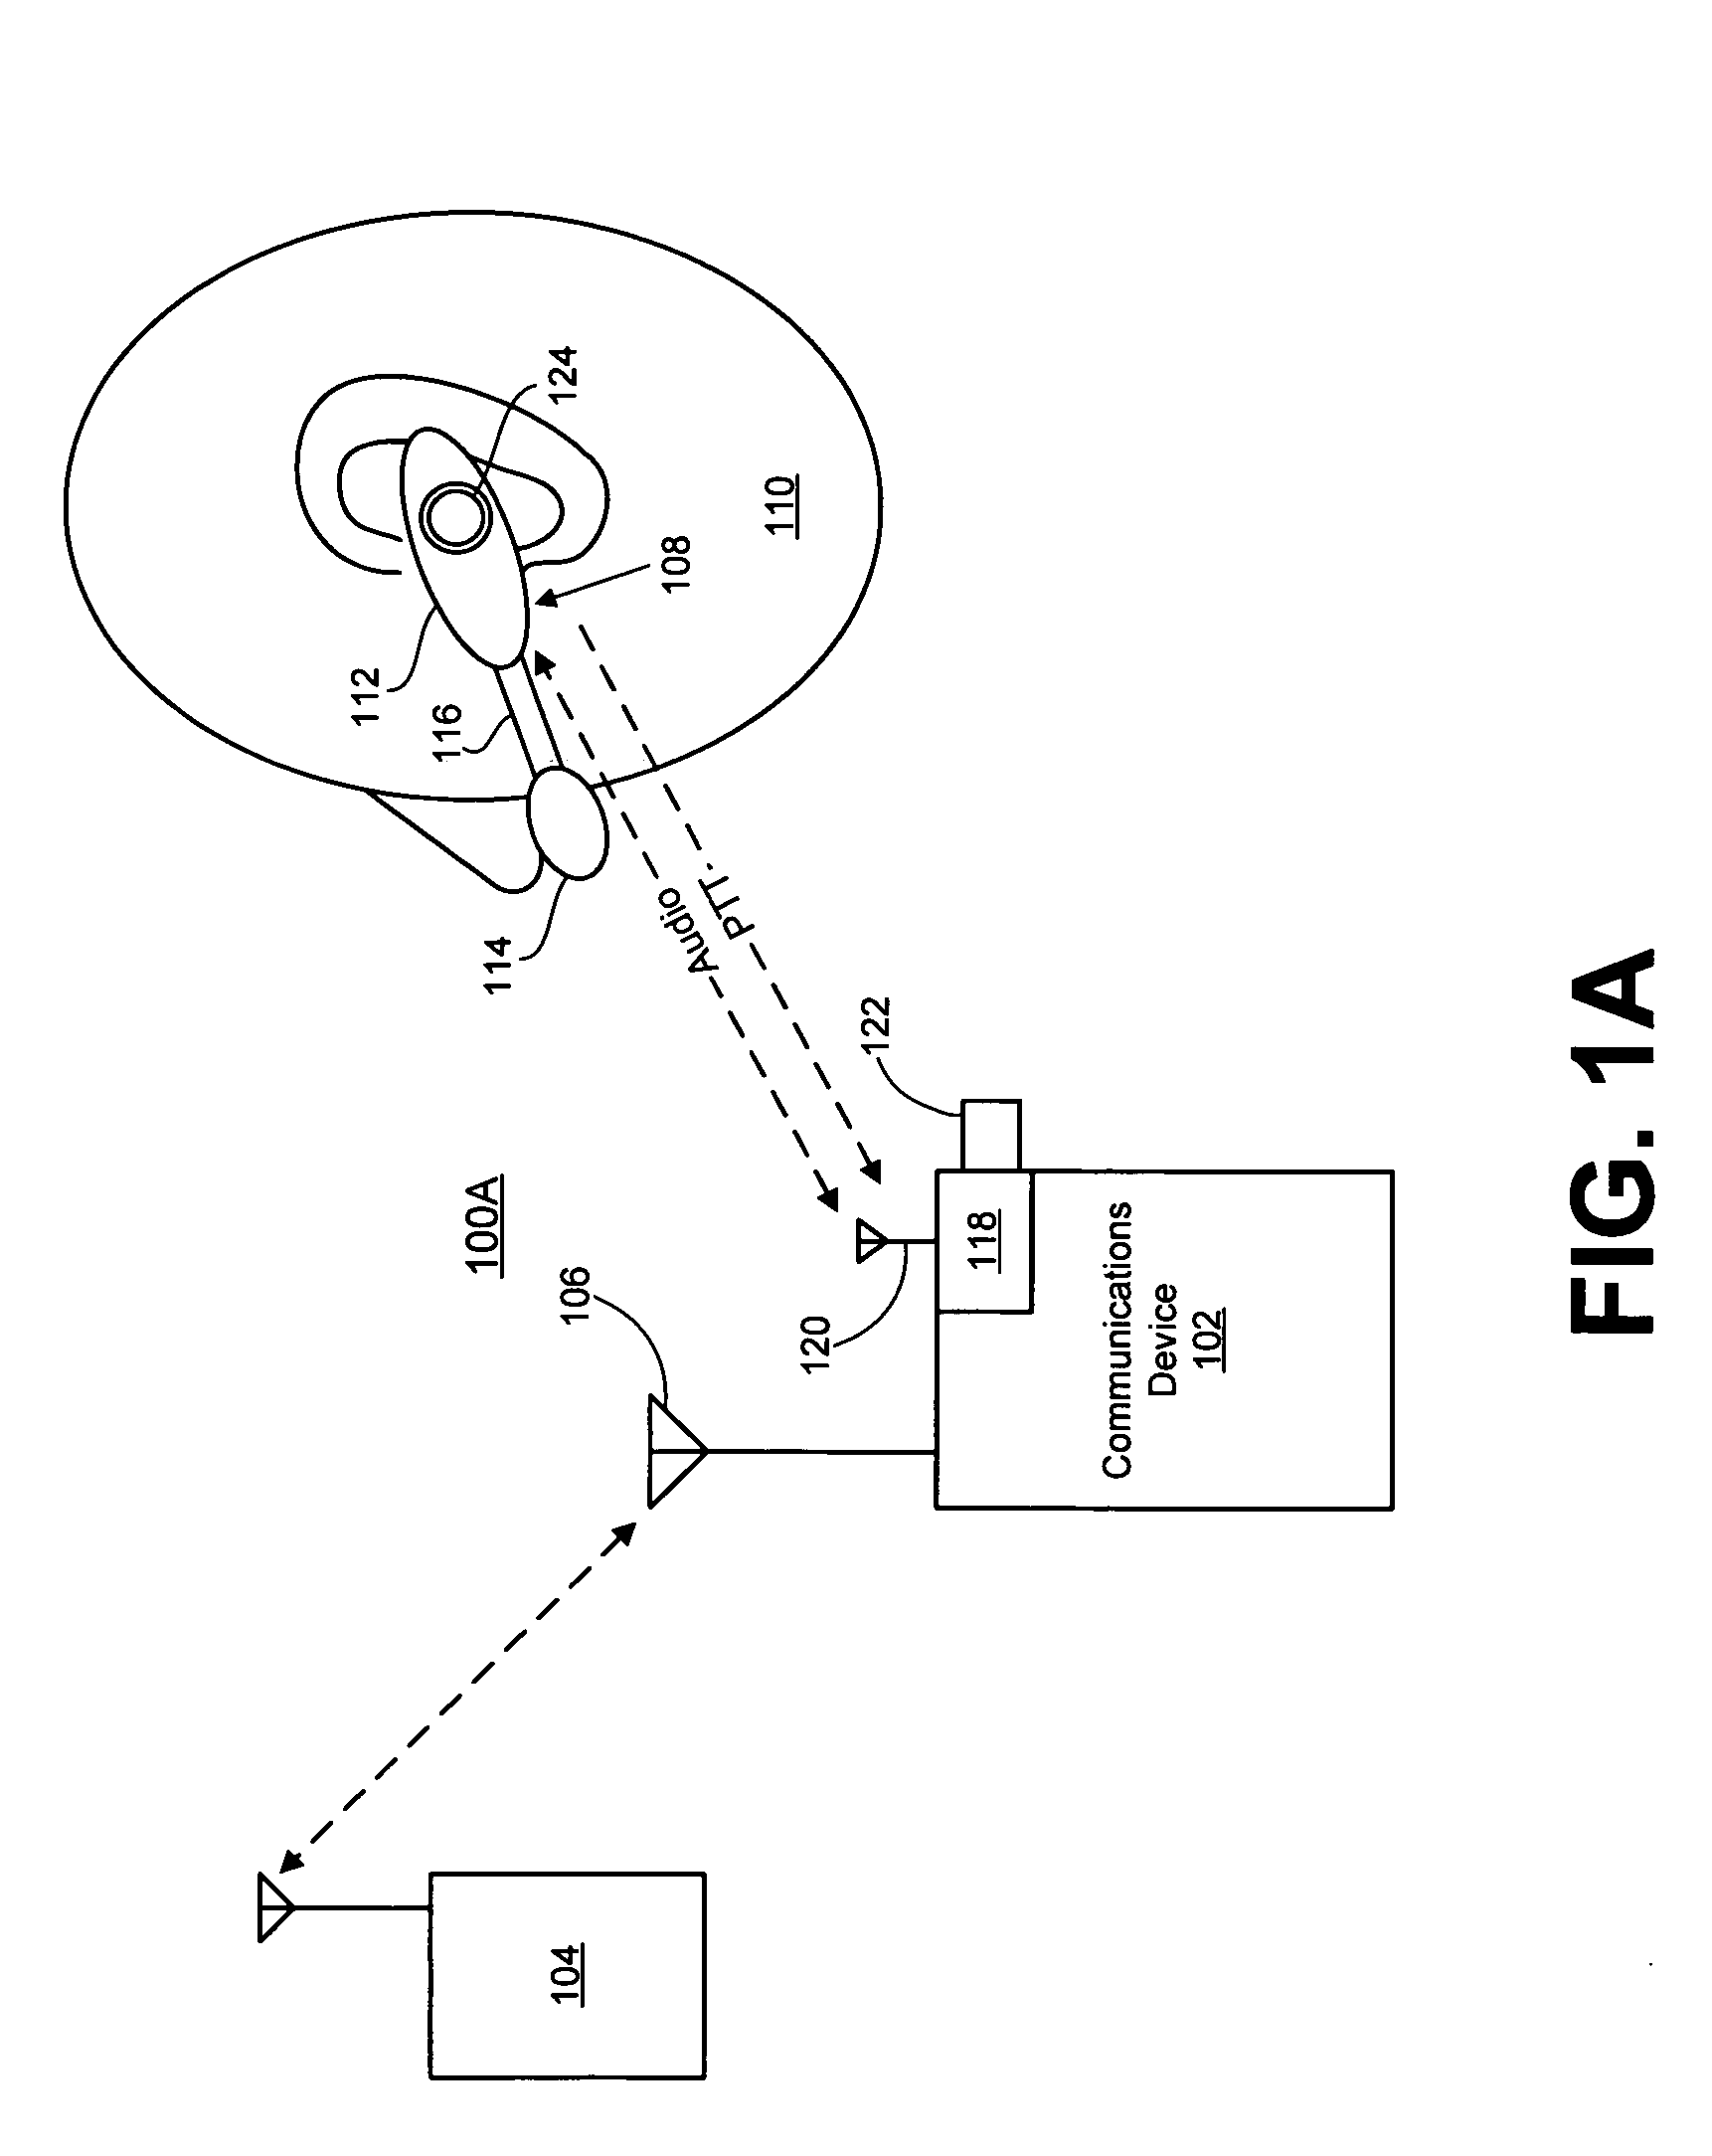 Wireless headset for communications device